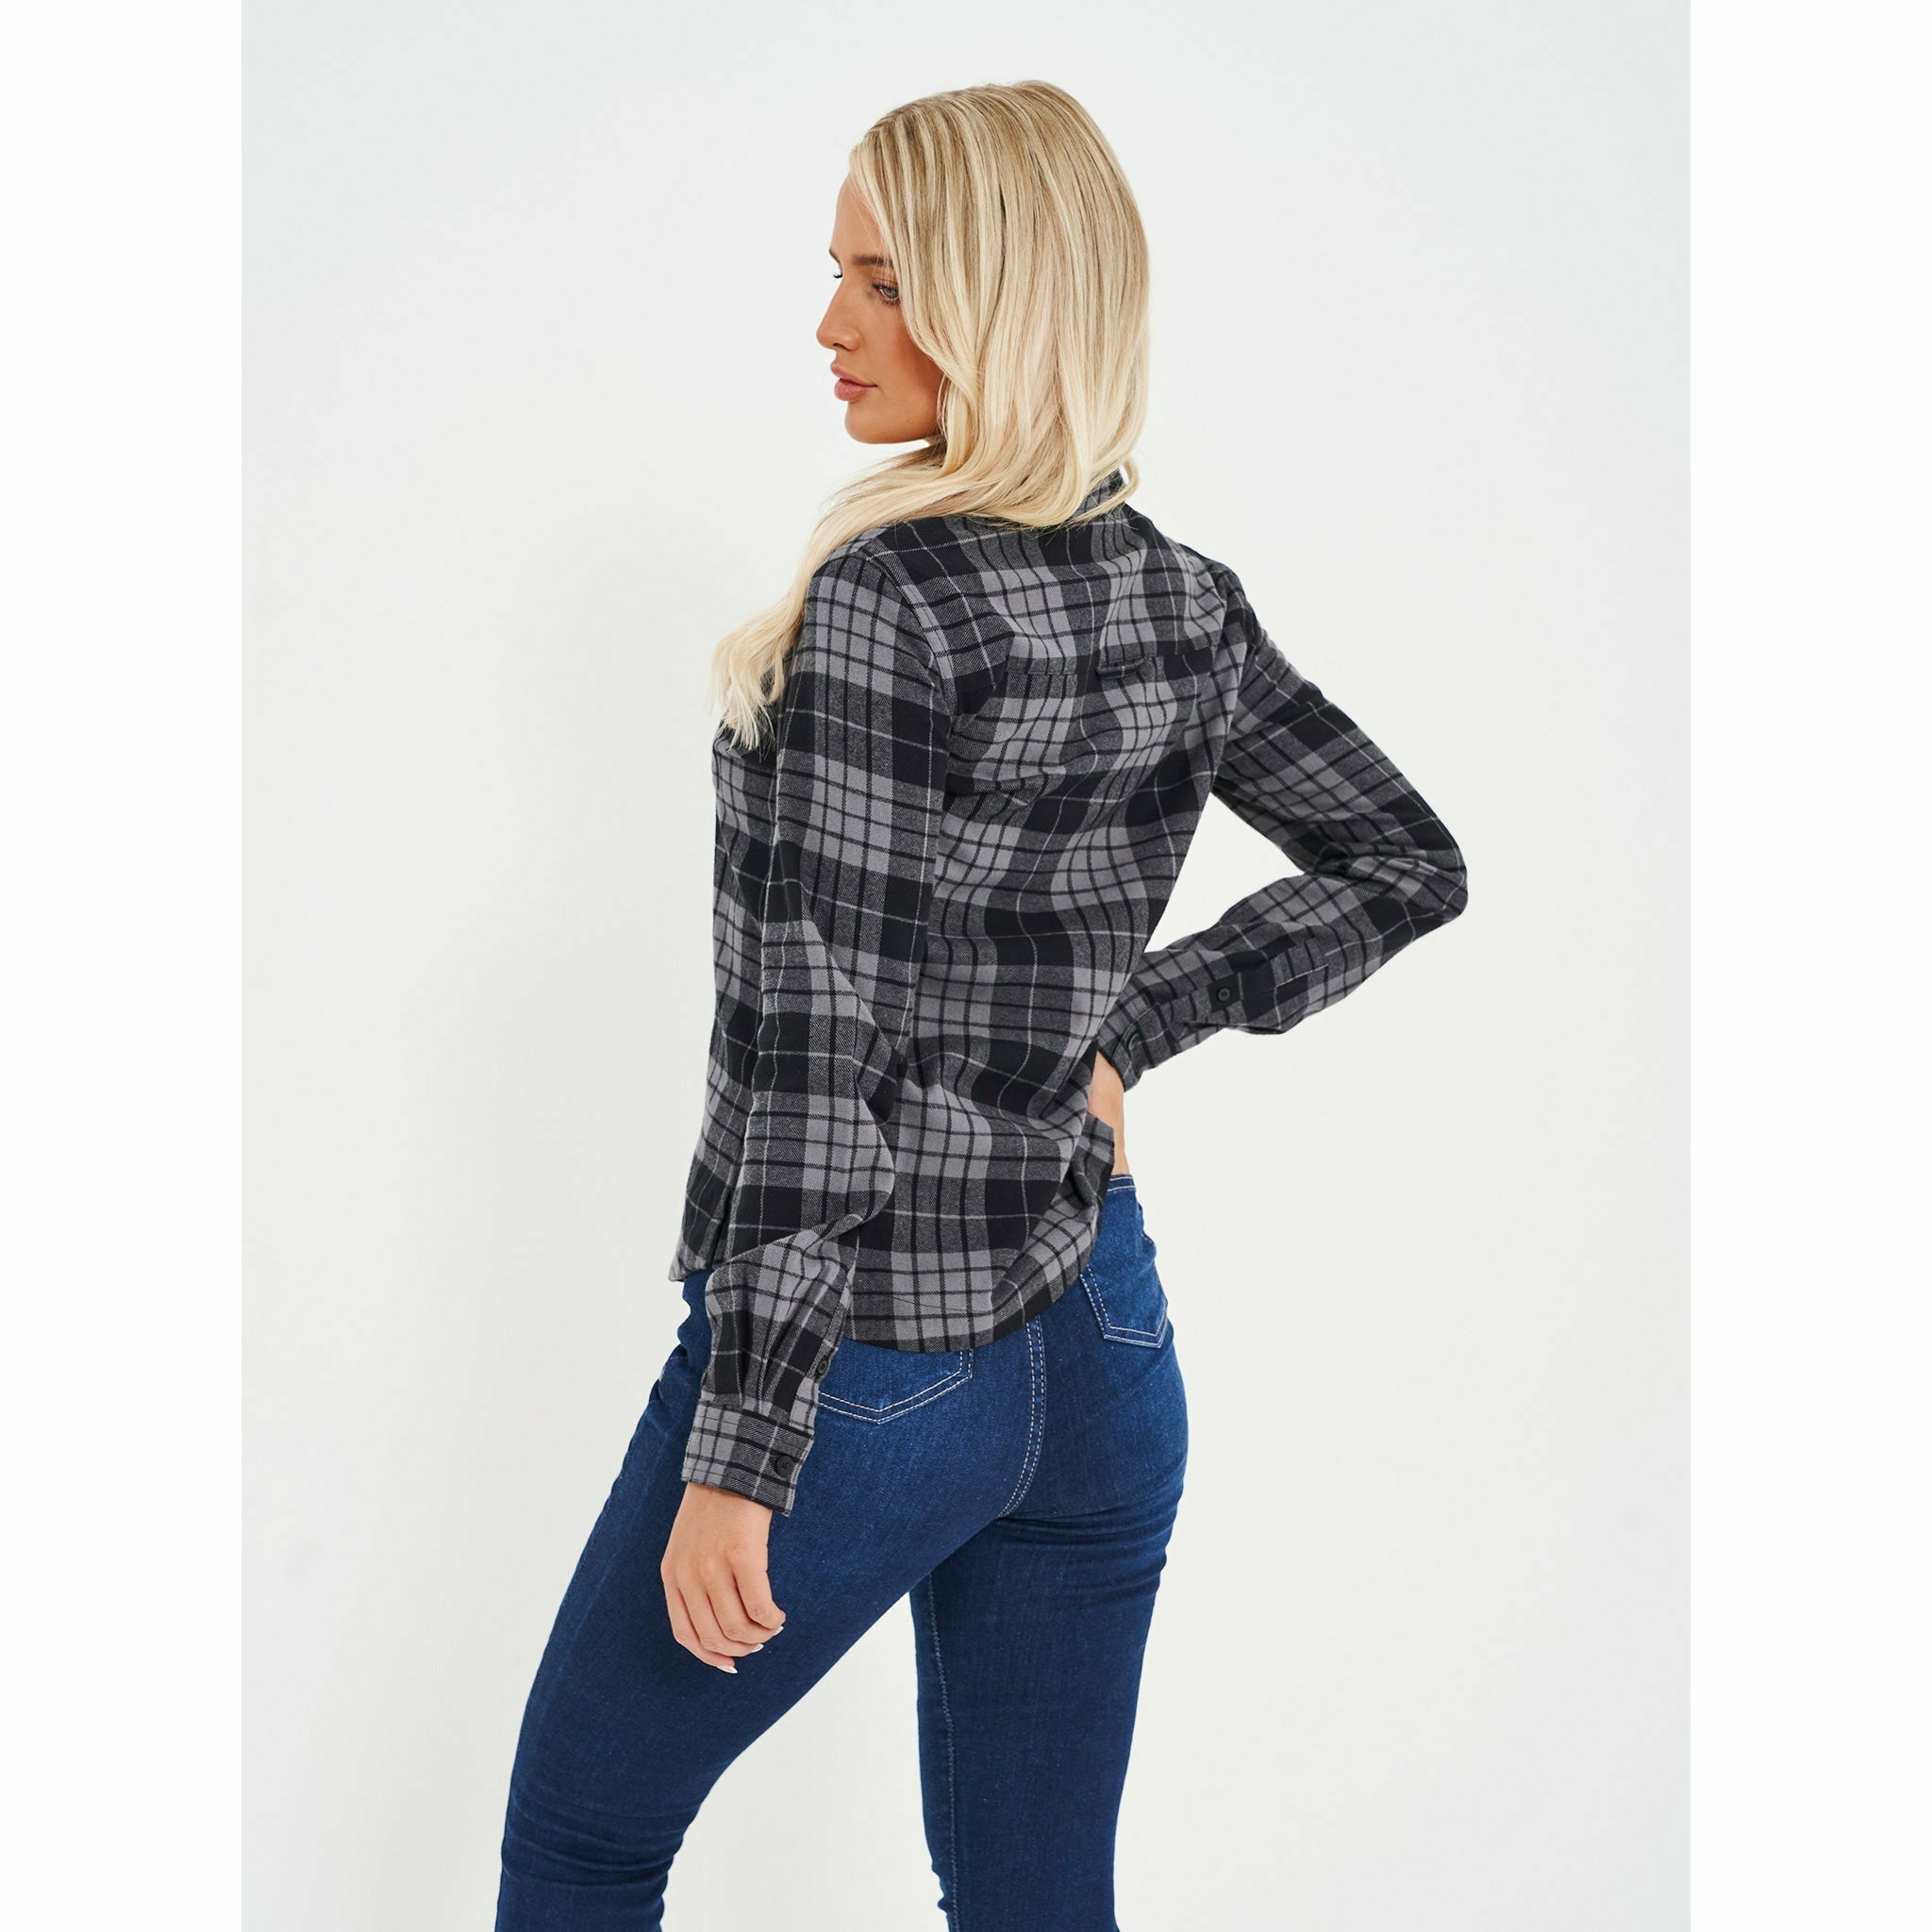 Womens 'CARLOWLY' Flannel Shirt - BLACK / CHARCOAL CHECK - Shop at www.Bench.co.uk #LoveMyHood